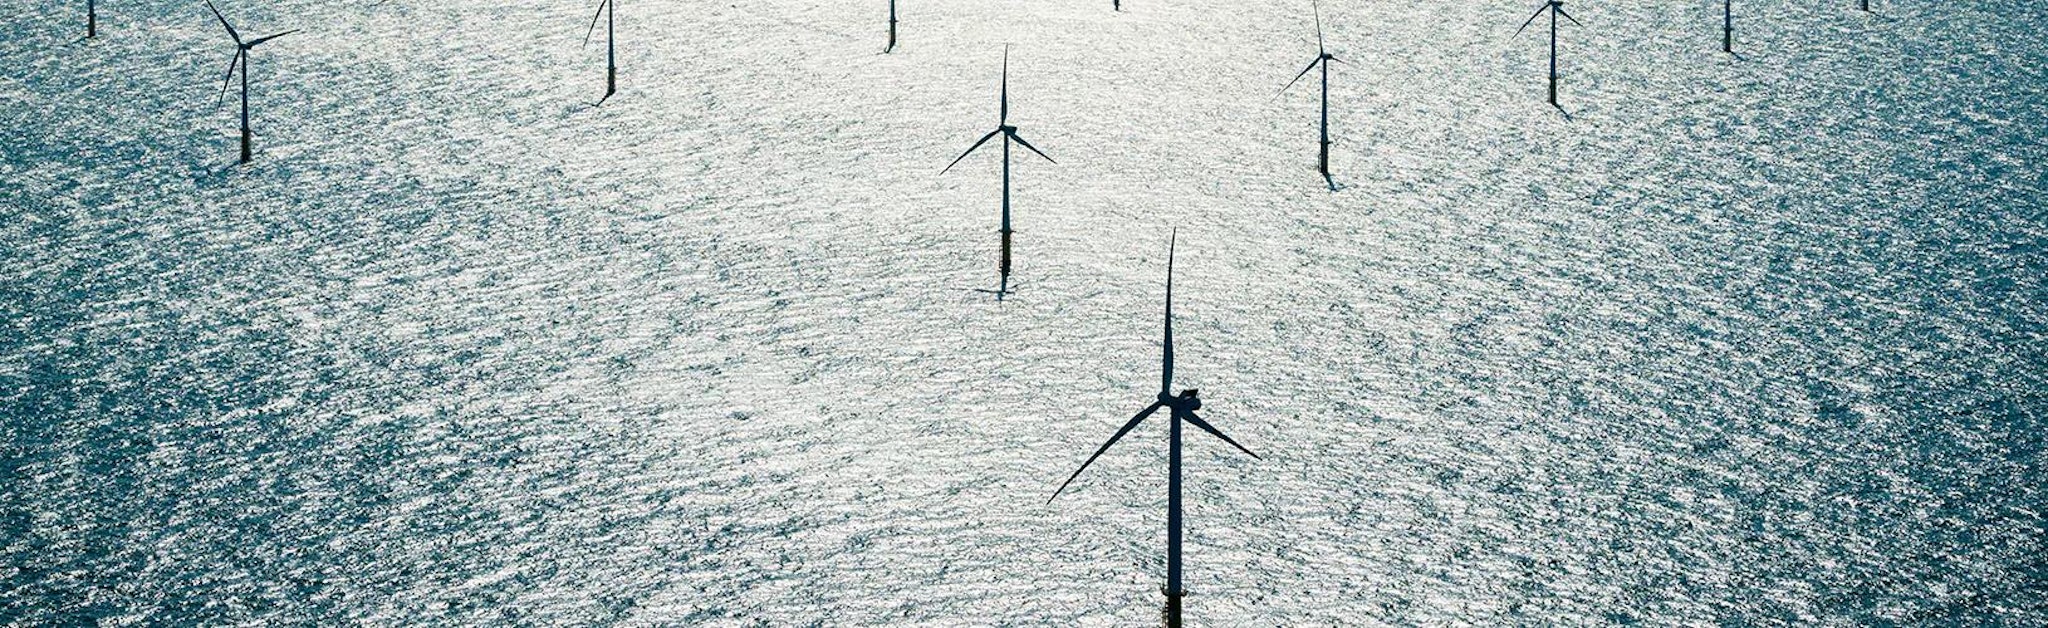 Board oversight of ESG can result in positive change like this off-shore windmill farm